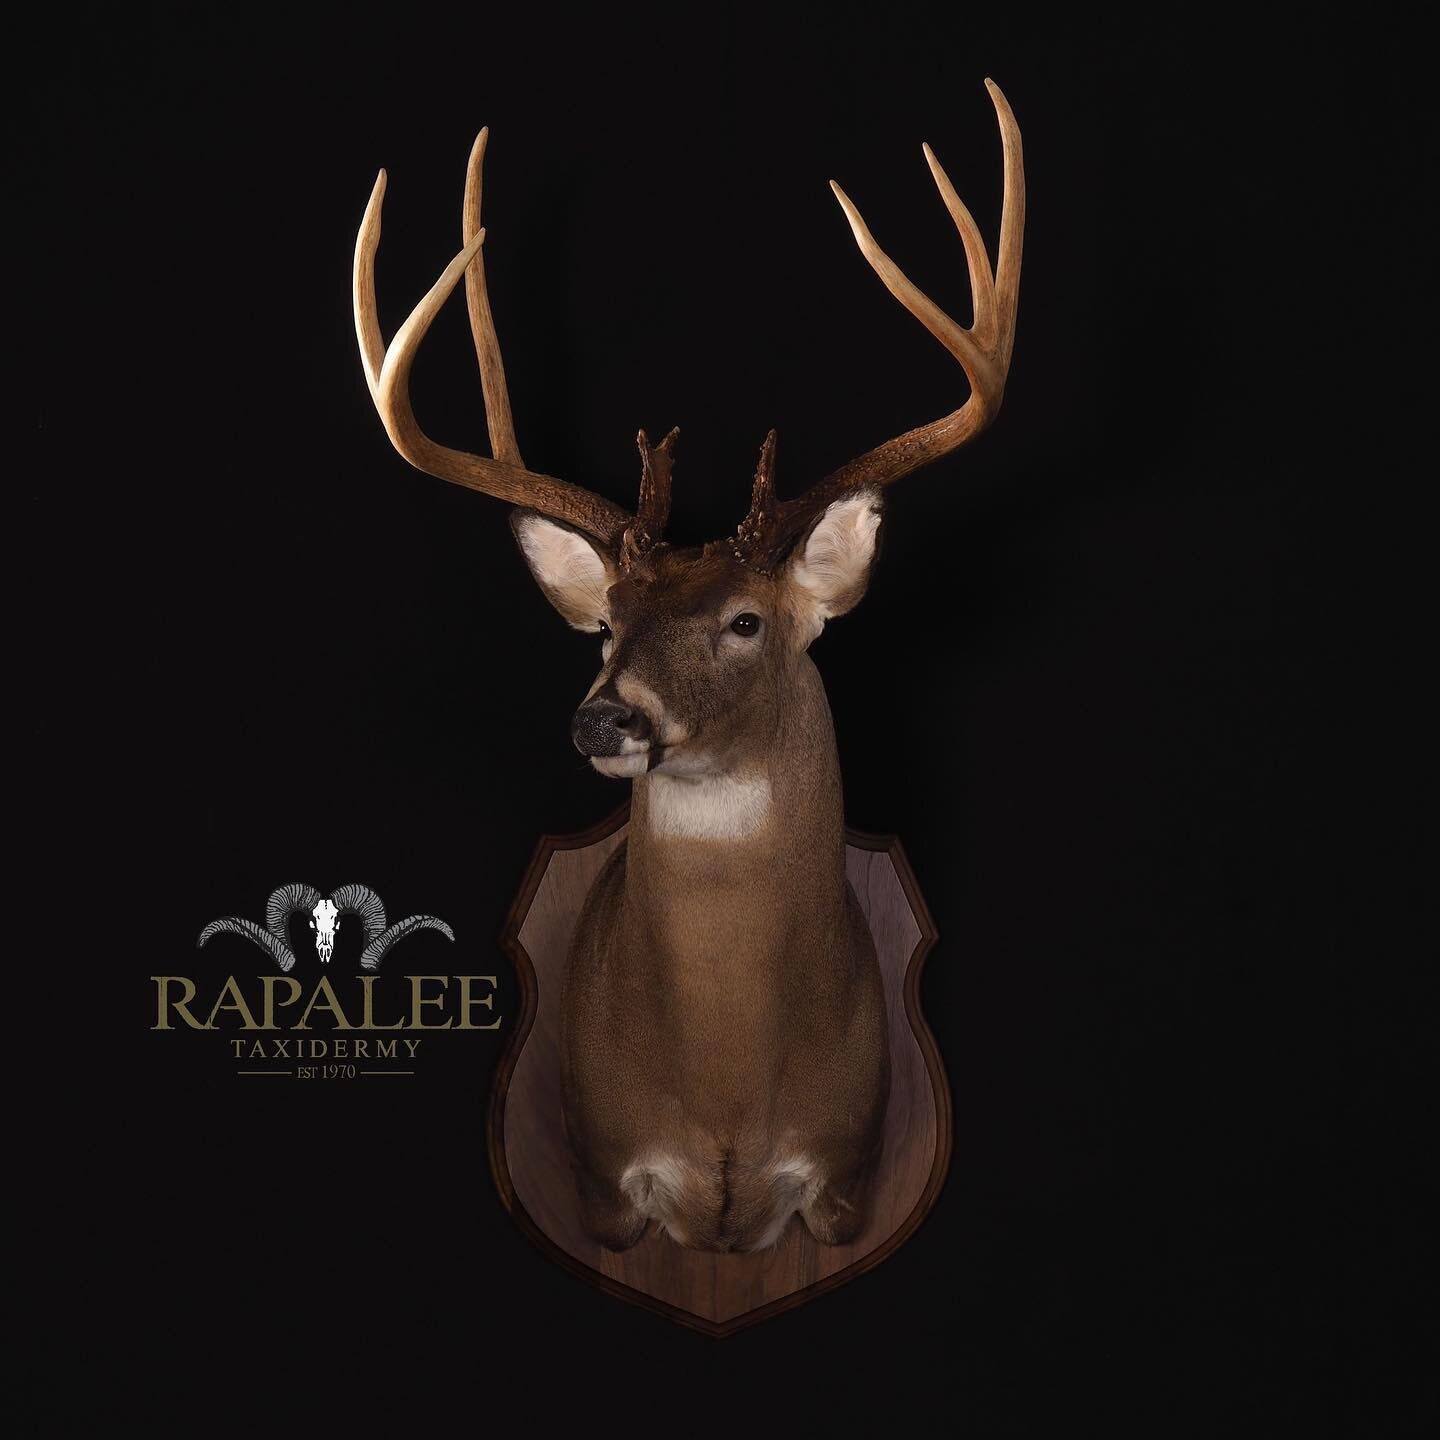 Todays featured buck is this long tined giant shown as a right turn upright with ears forward and alert. This is a classic pose that really shows the majestic look of a mature whitetail buck. #rapaleetaxidermy #virginiataxidermy #virginiataxidermist 